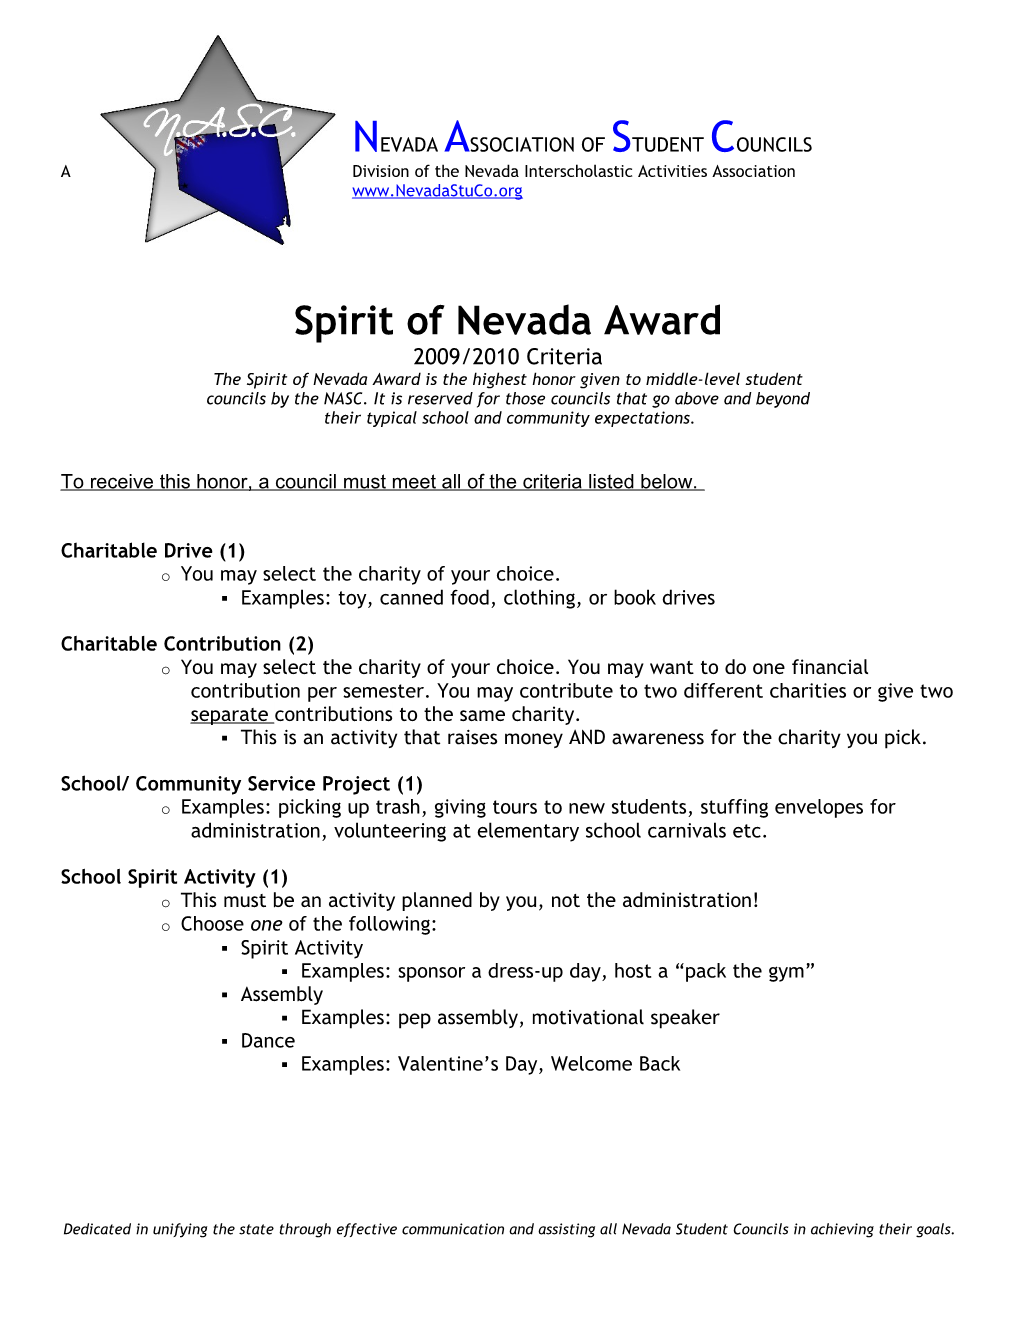 Nevada Association of Student Councils s1